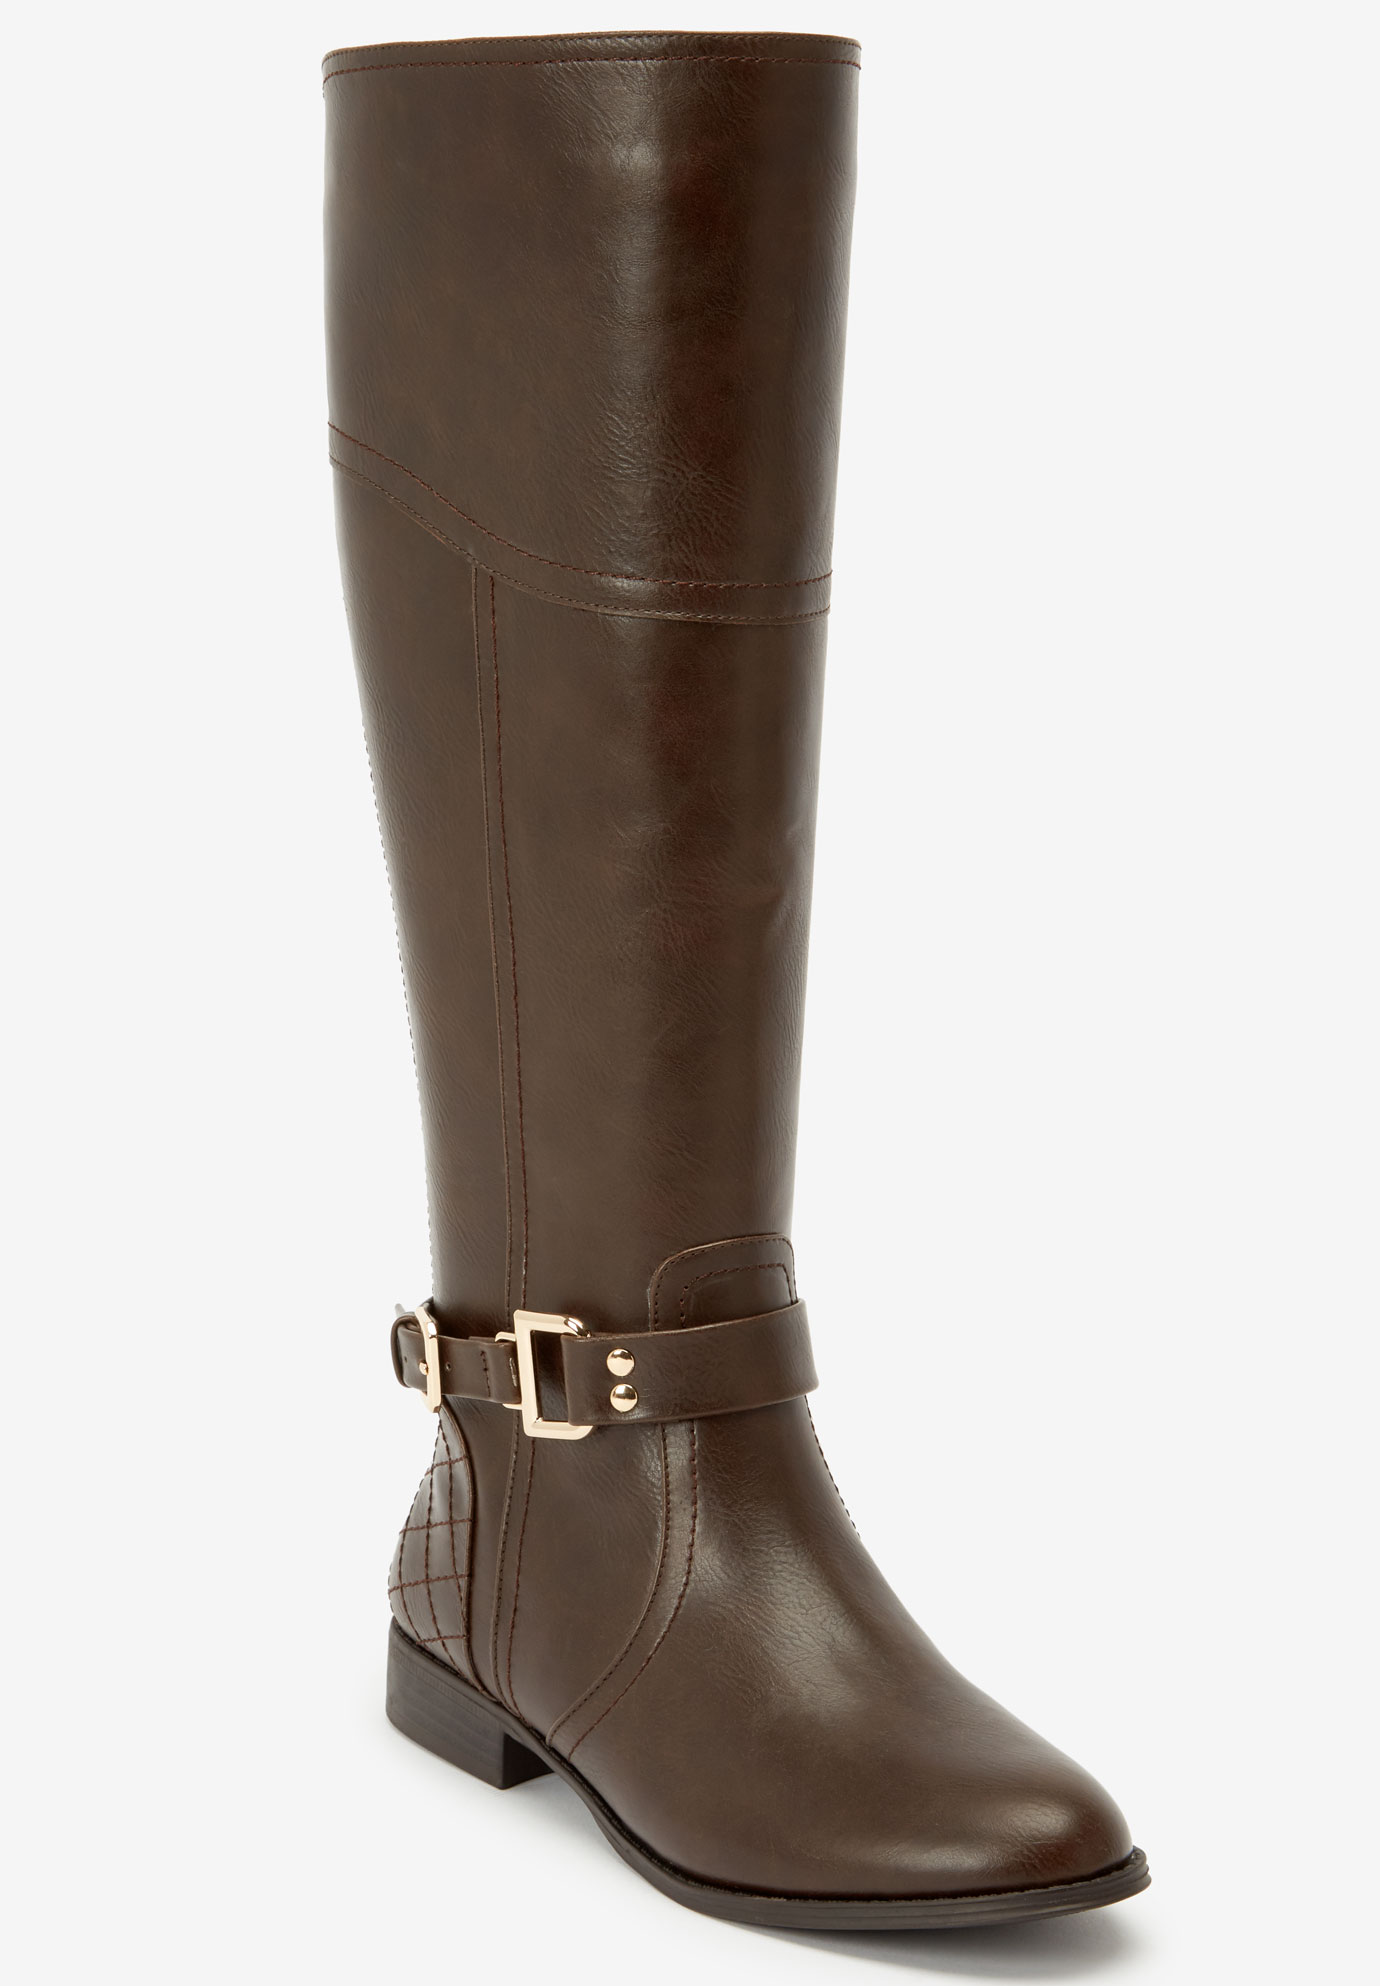 widest calf boots available